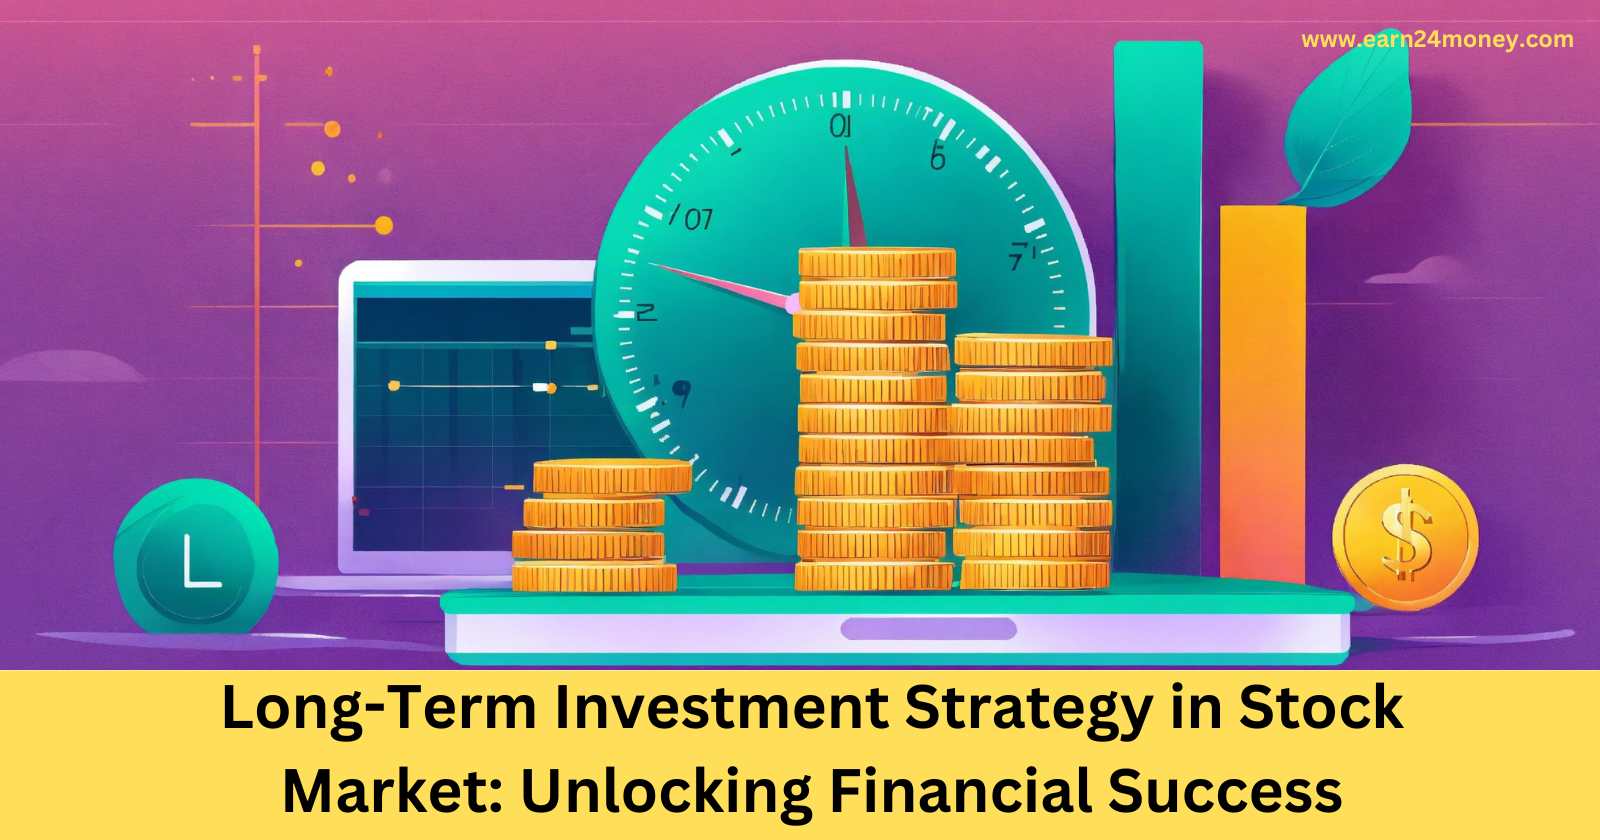 Long-Term Investment Strategy in Stock Market: Unlocking Financial Success